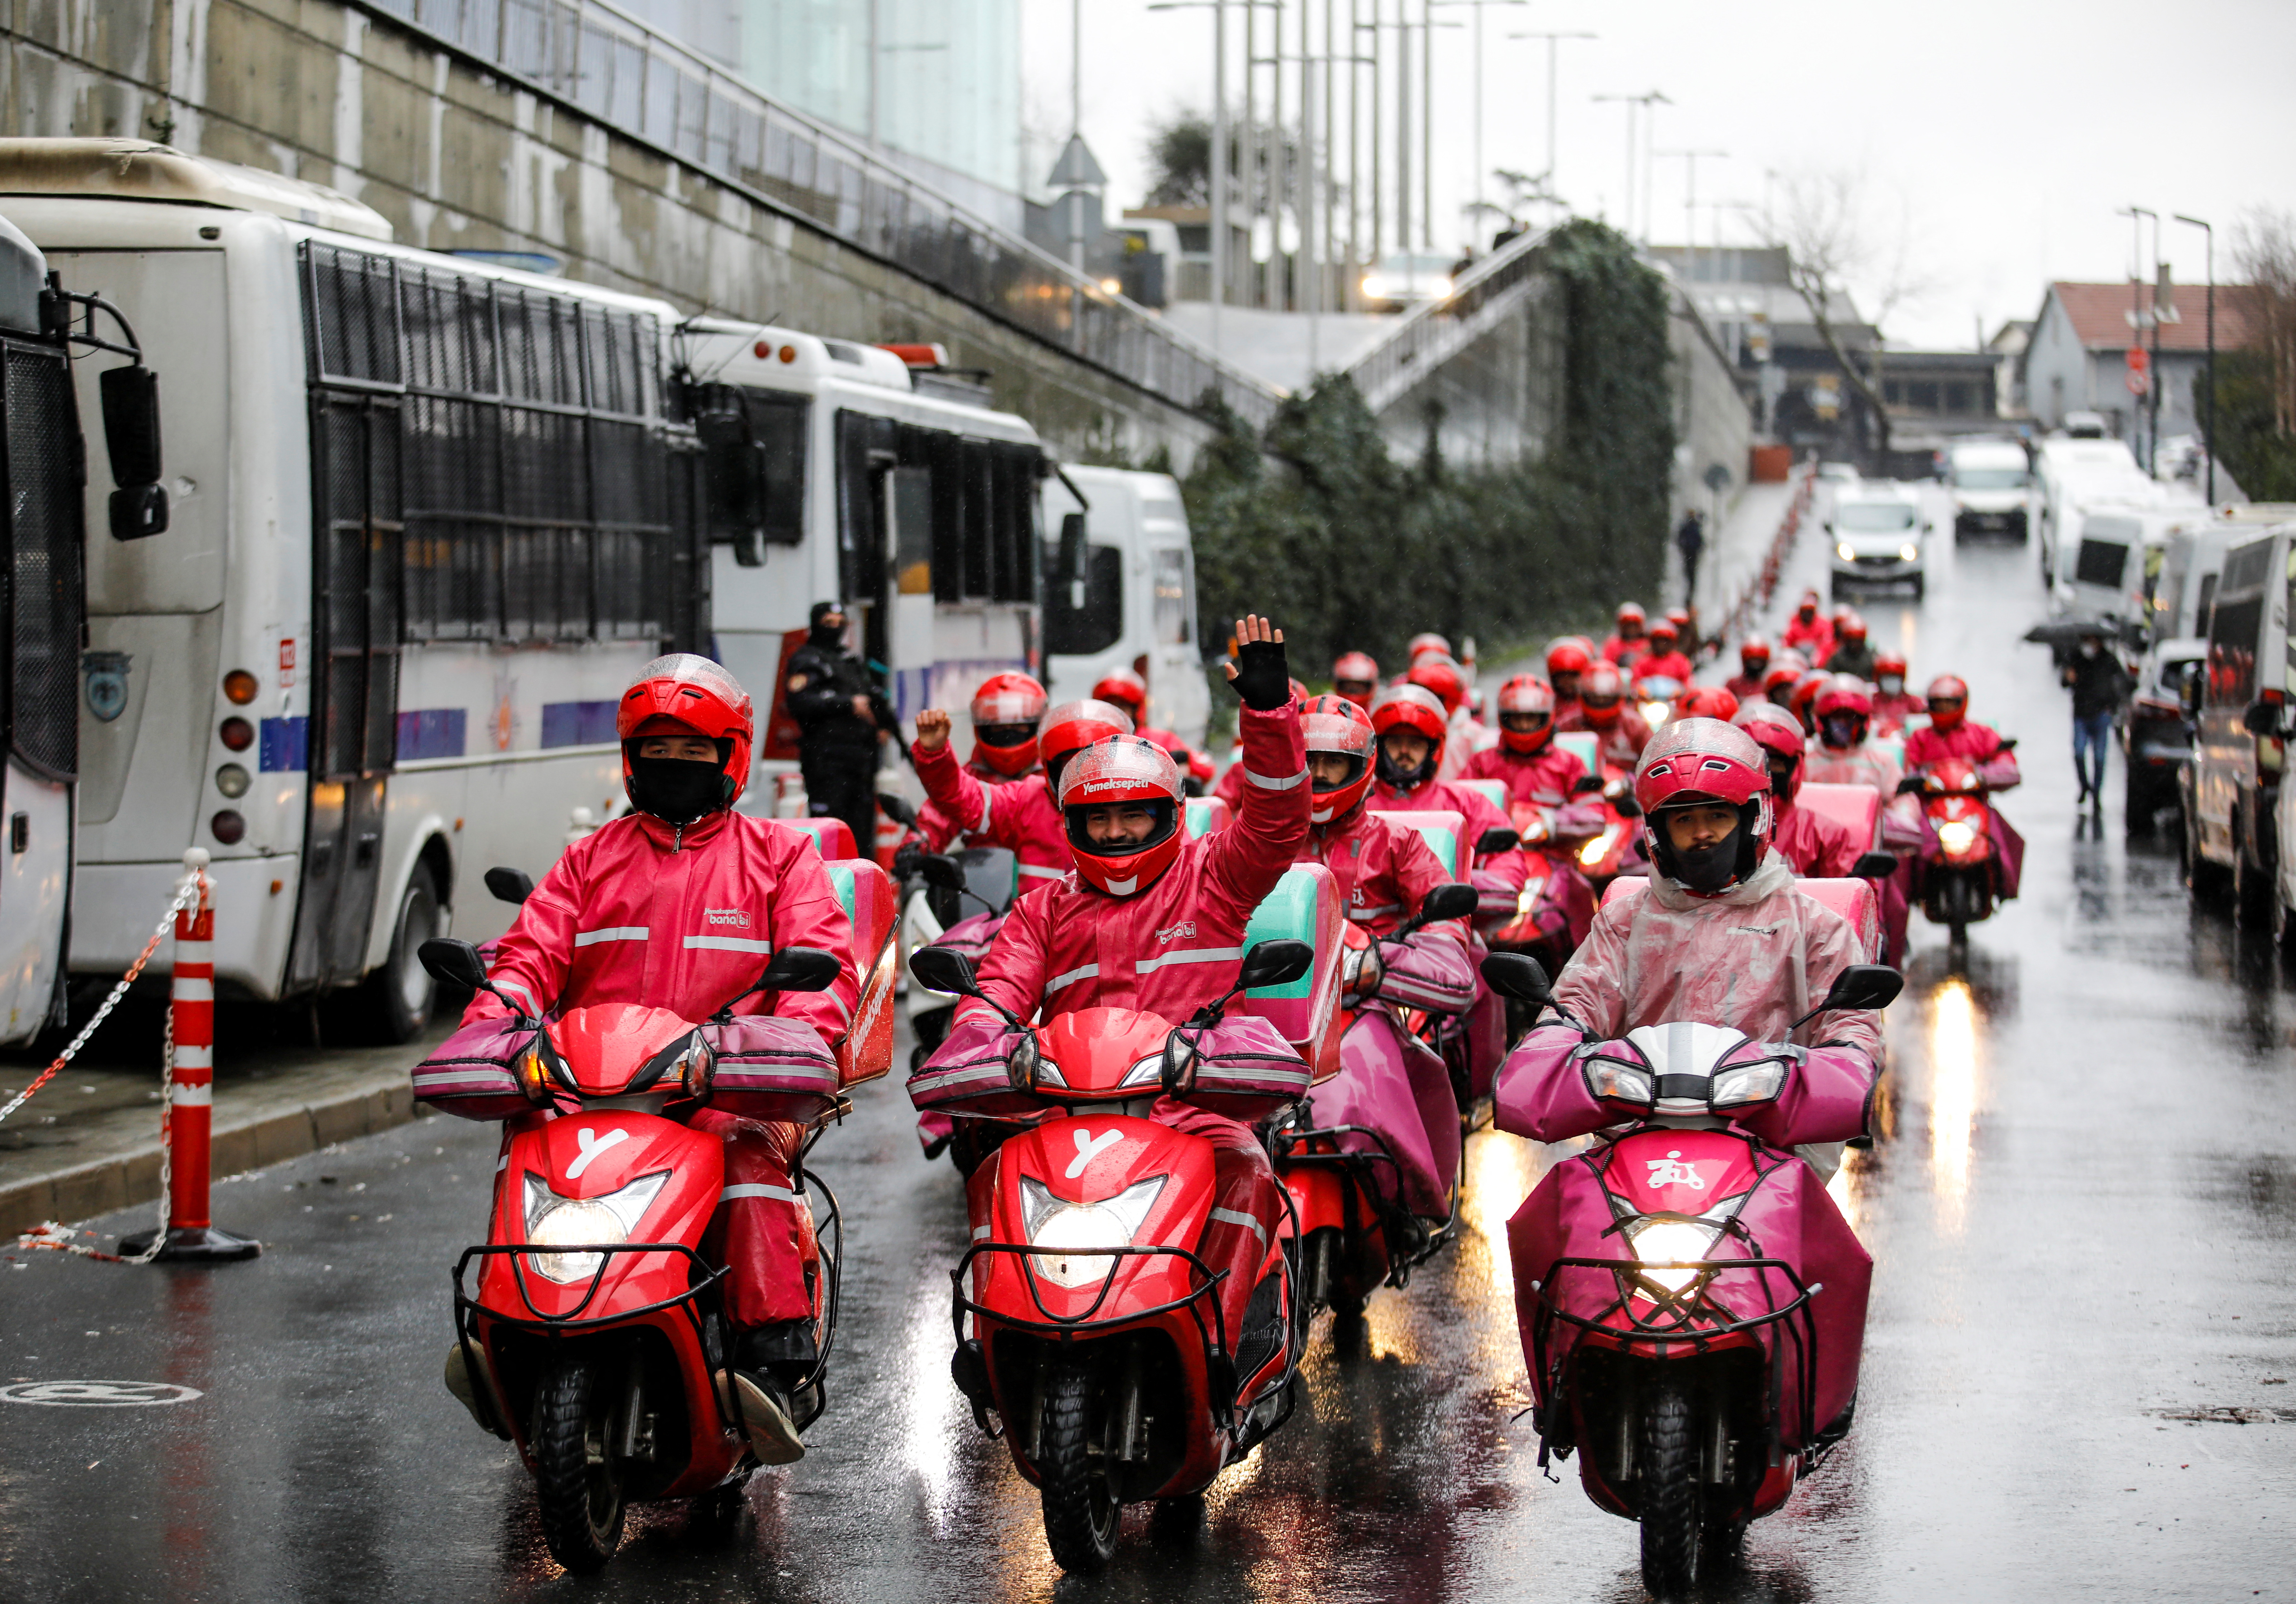 Delivery couriers of Yemek Sepeti on strike shout slogans on their scooters in Istanbul